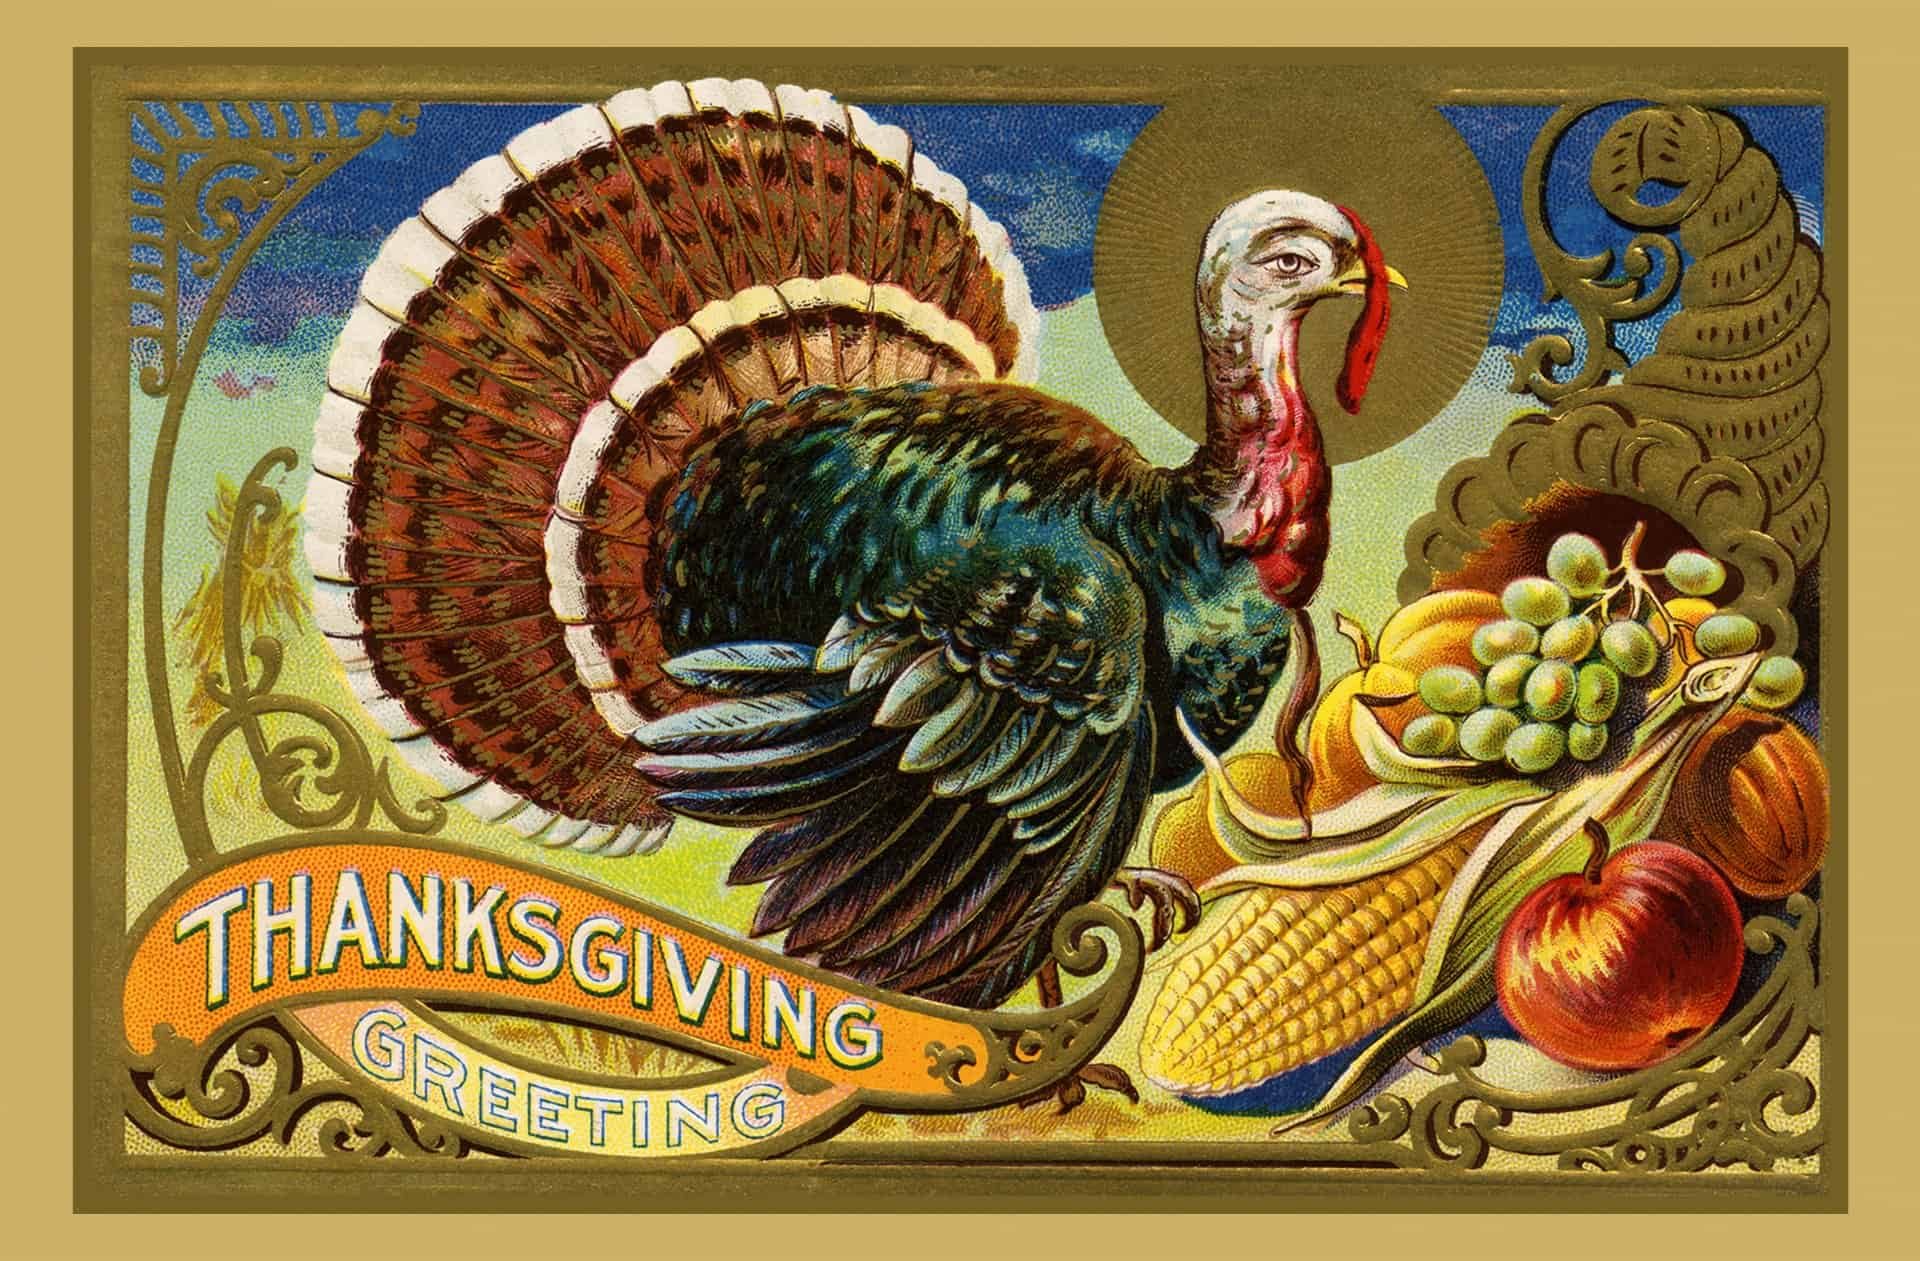 Thanksgiving Day Traditions thanksgiving-vintage-turkey-card-1628918899wN4